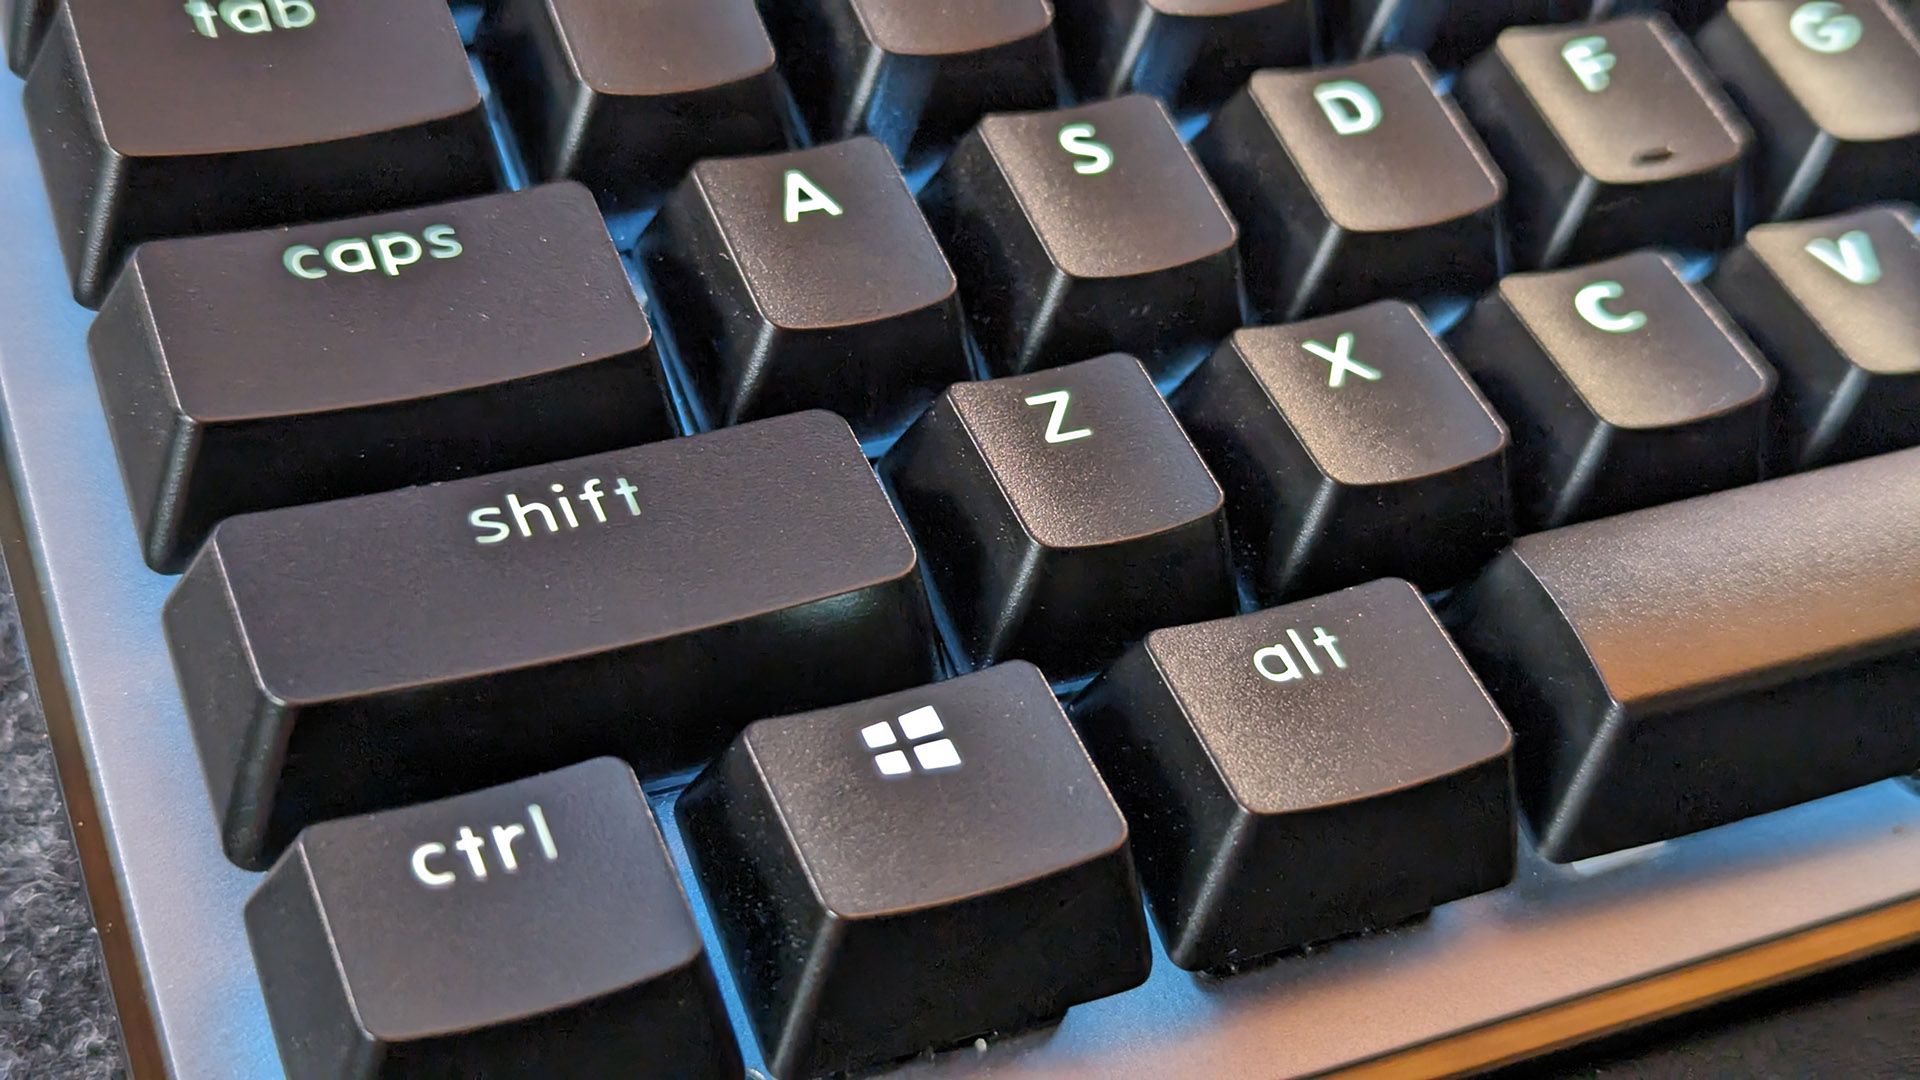 Behold, the dumbest Windows keyboard shortcut of them all